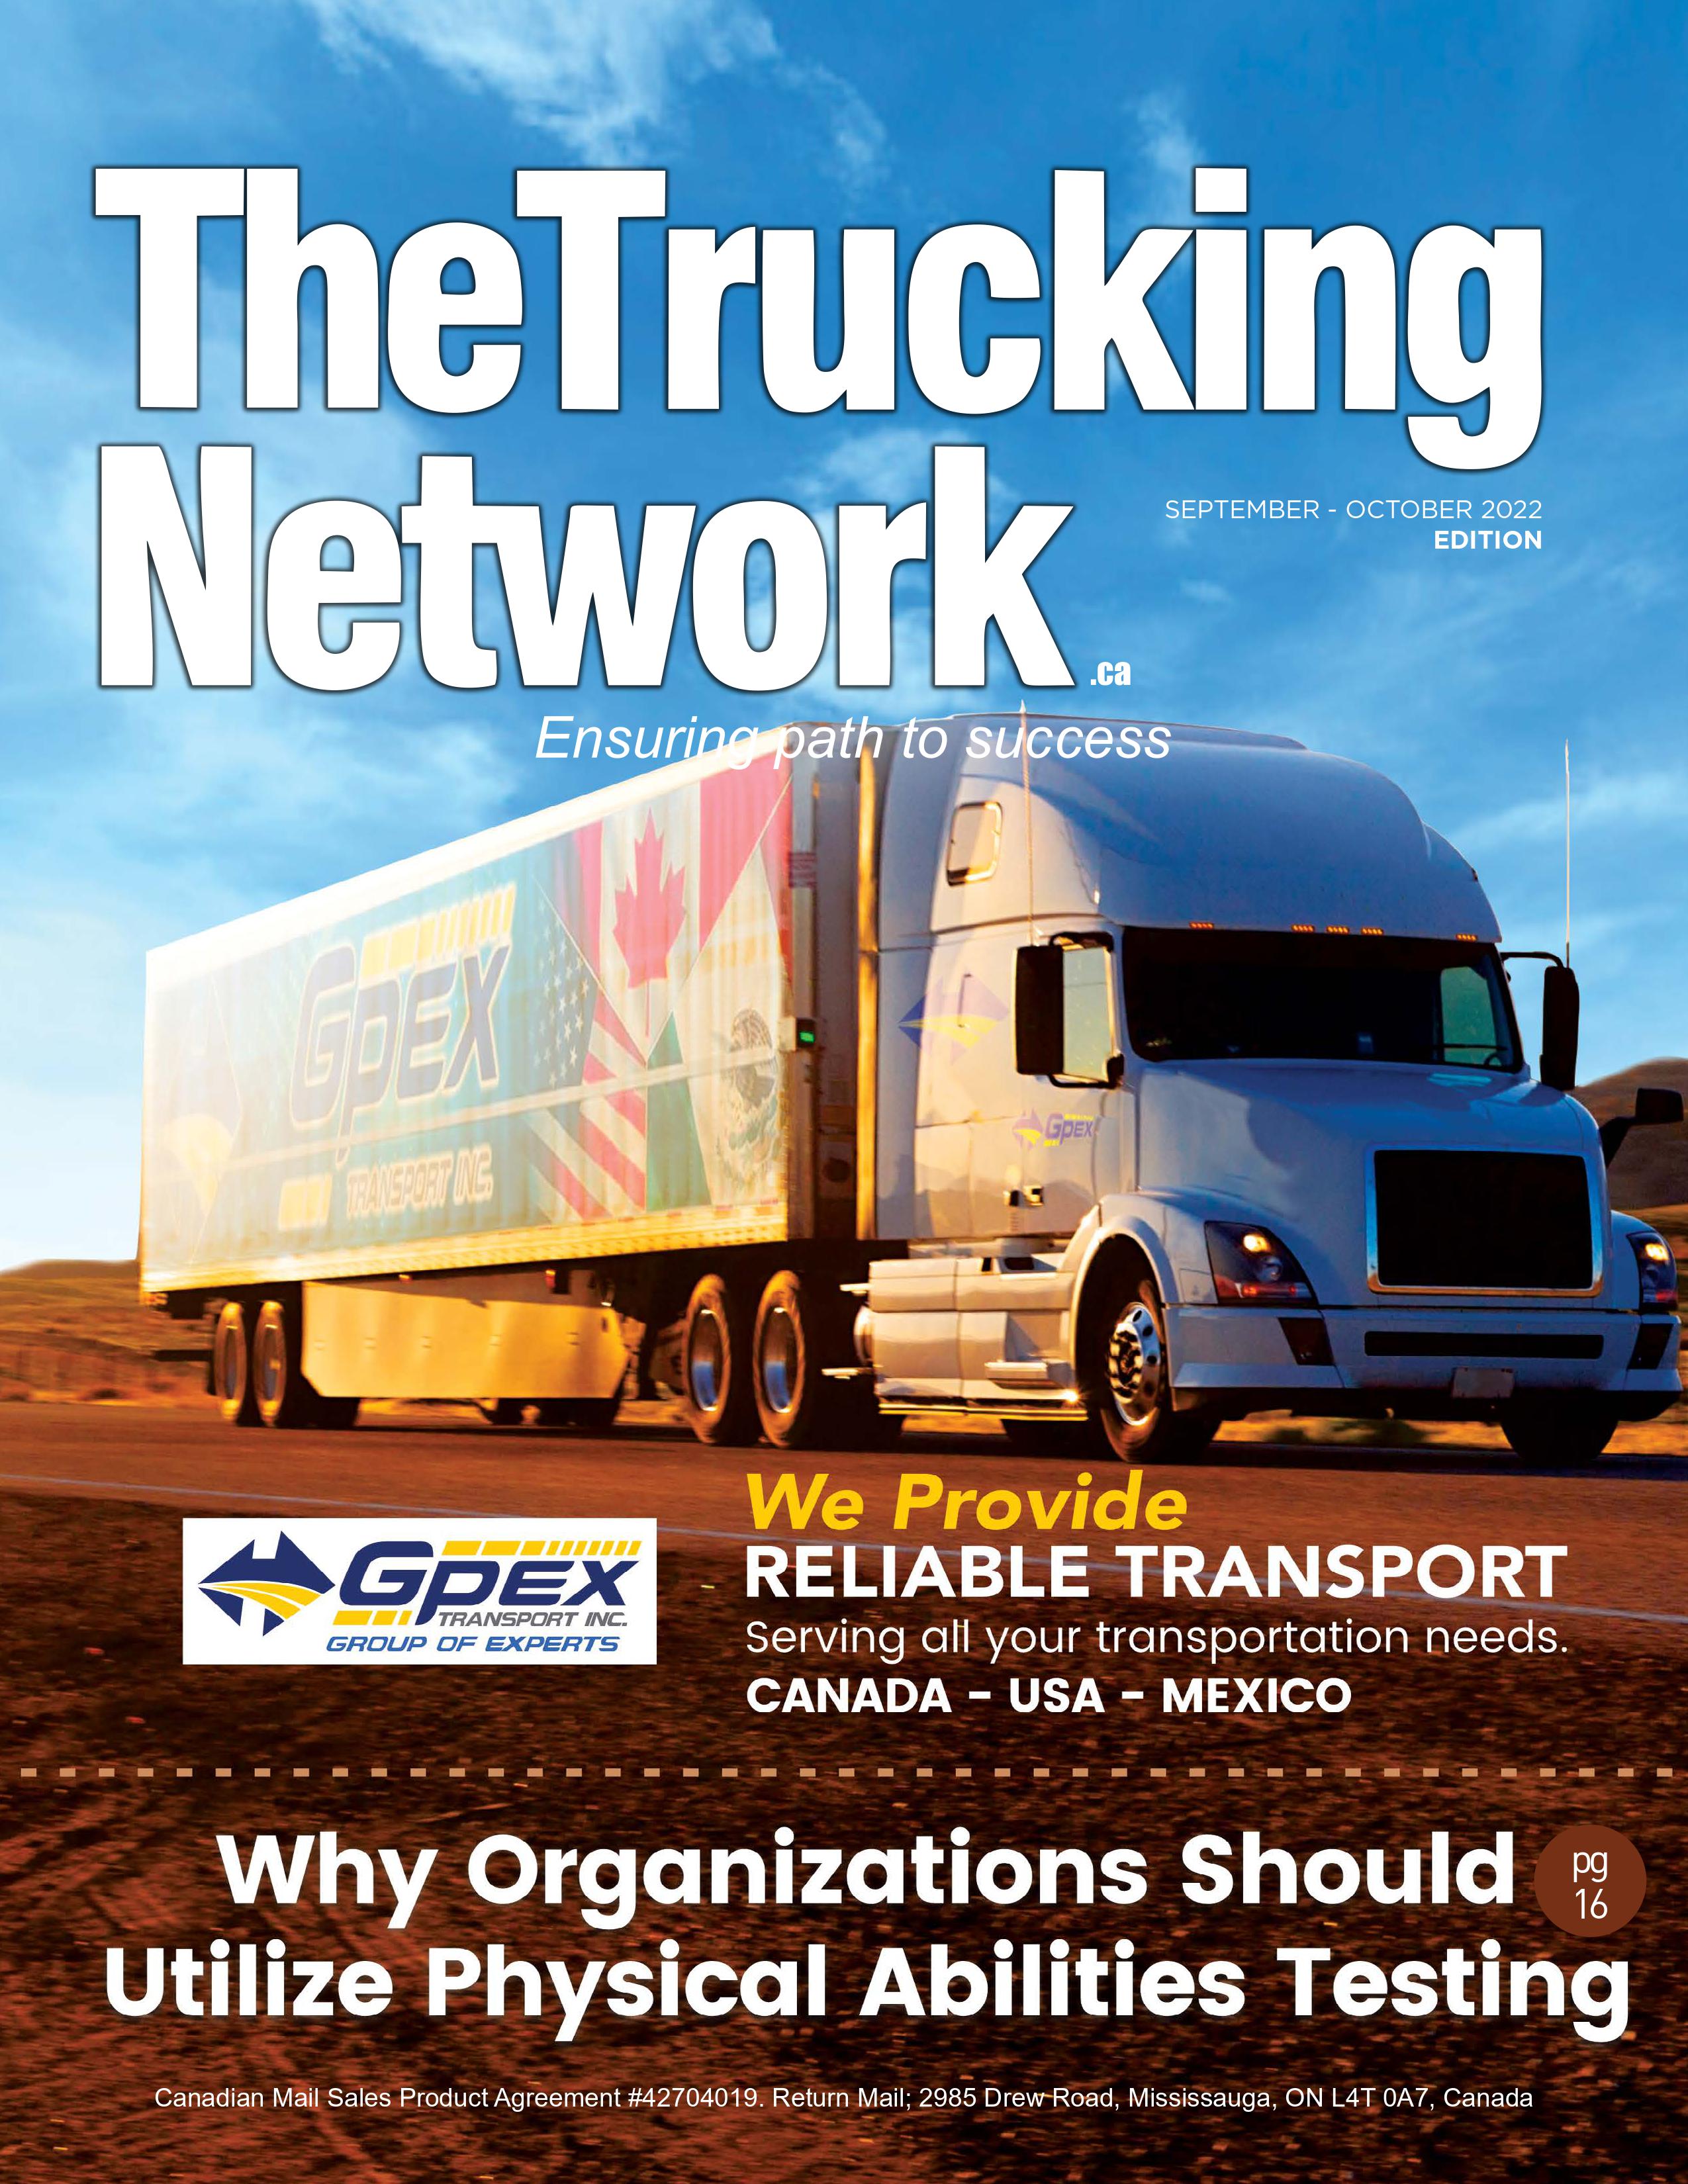 The Trucking Network Magazine Sep-October 2022 Edition